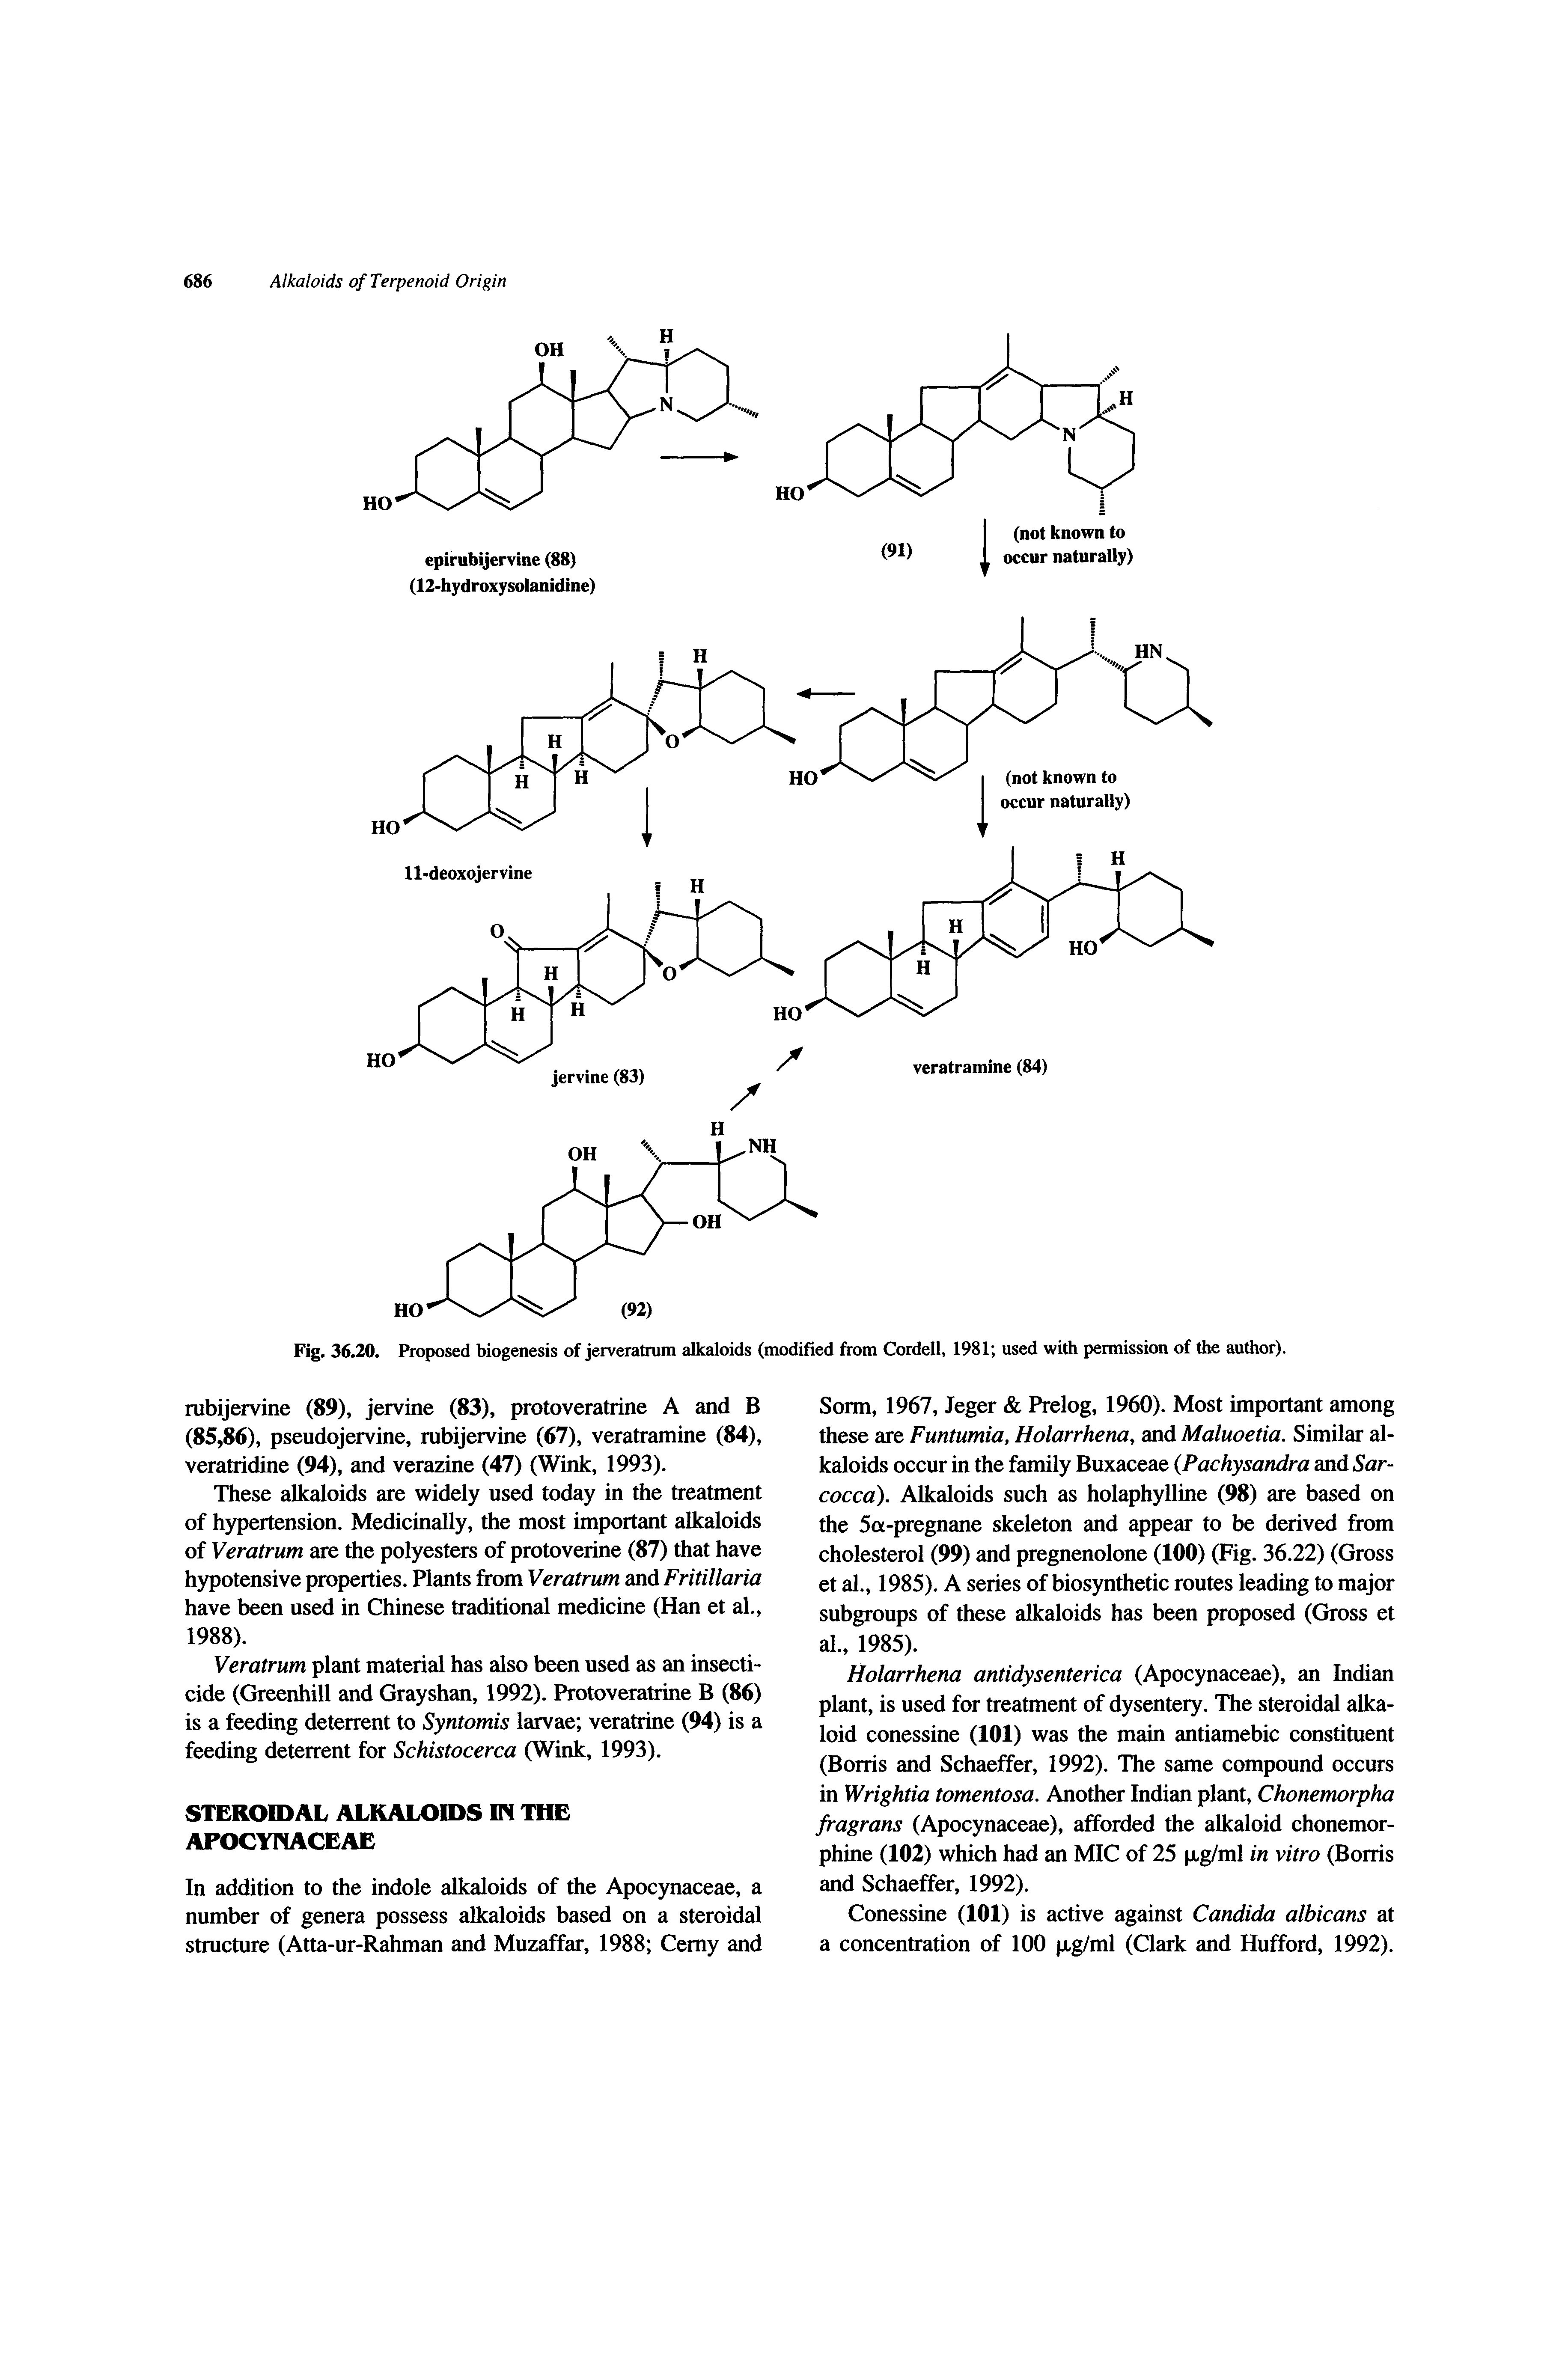 Fig. 36.20. Proposed biogenesis of jerveratrum alkaloids (modified from Cordell, 1981 used with permission of the author).